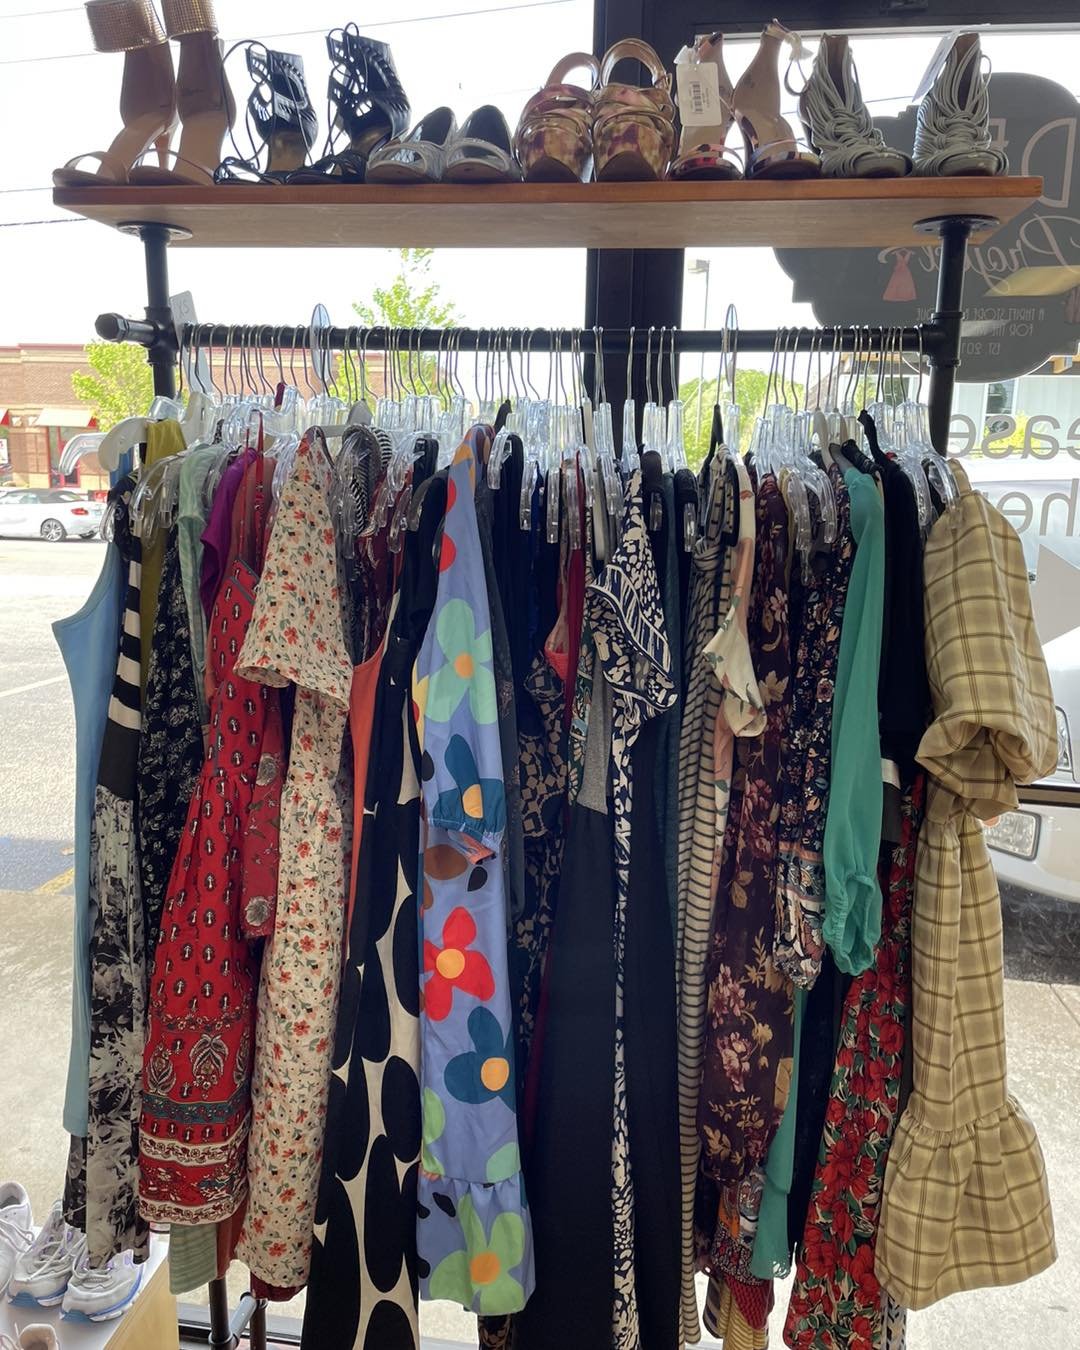 We have restocked and ready for another day of 50% off ladies dresses! Stop by 10:30-4:30 and shop!